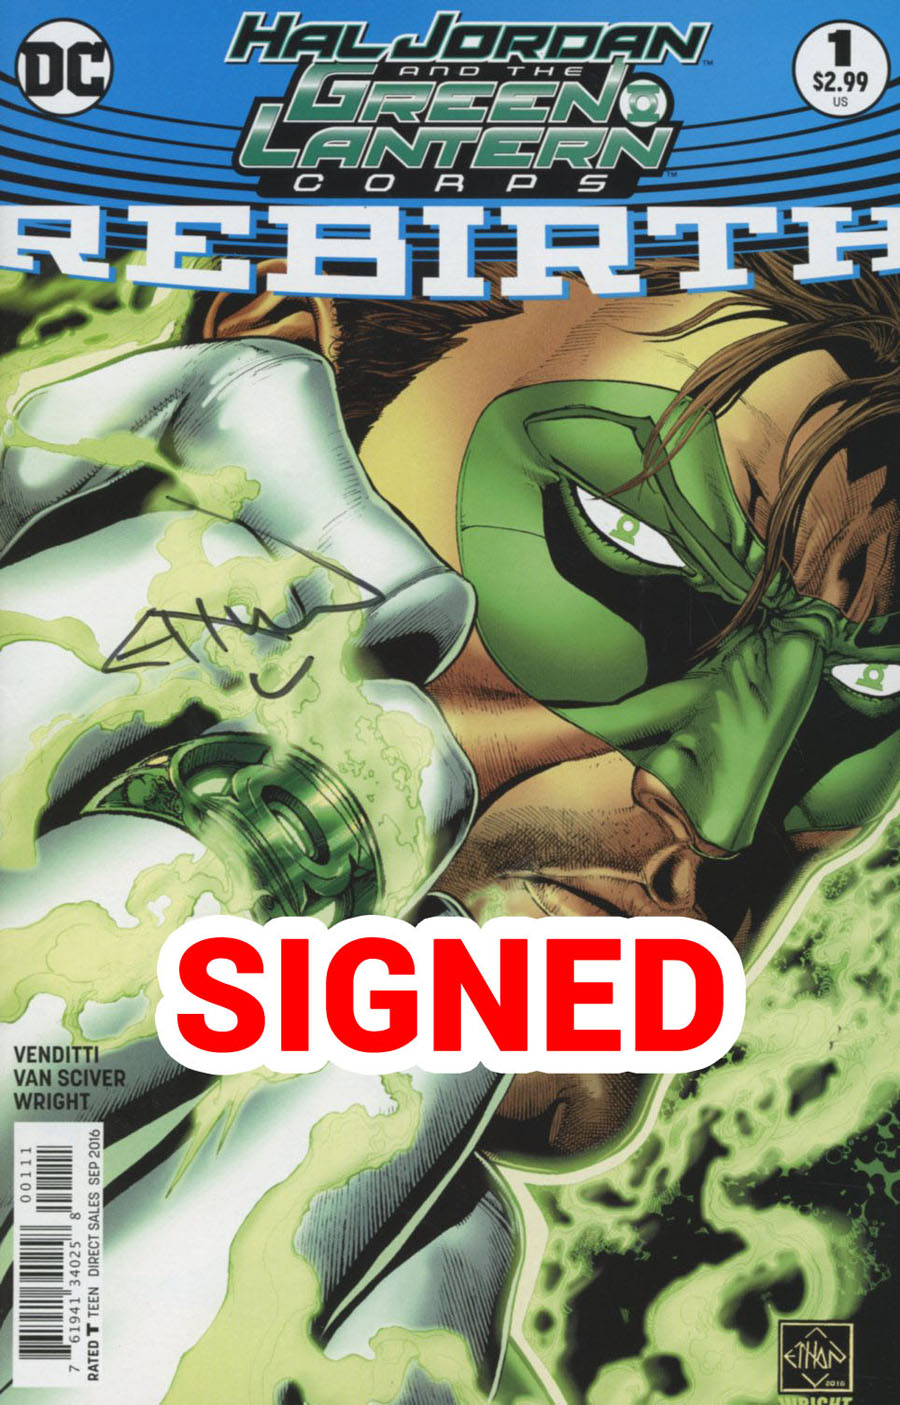 Hal Jordan And The Green Lantern Corps Rebirth #1 Cover D Regular Ethan Van Sciver Cover Signed By Ethan Van Sciver (Limit 1 Per Customer)